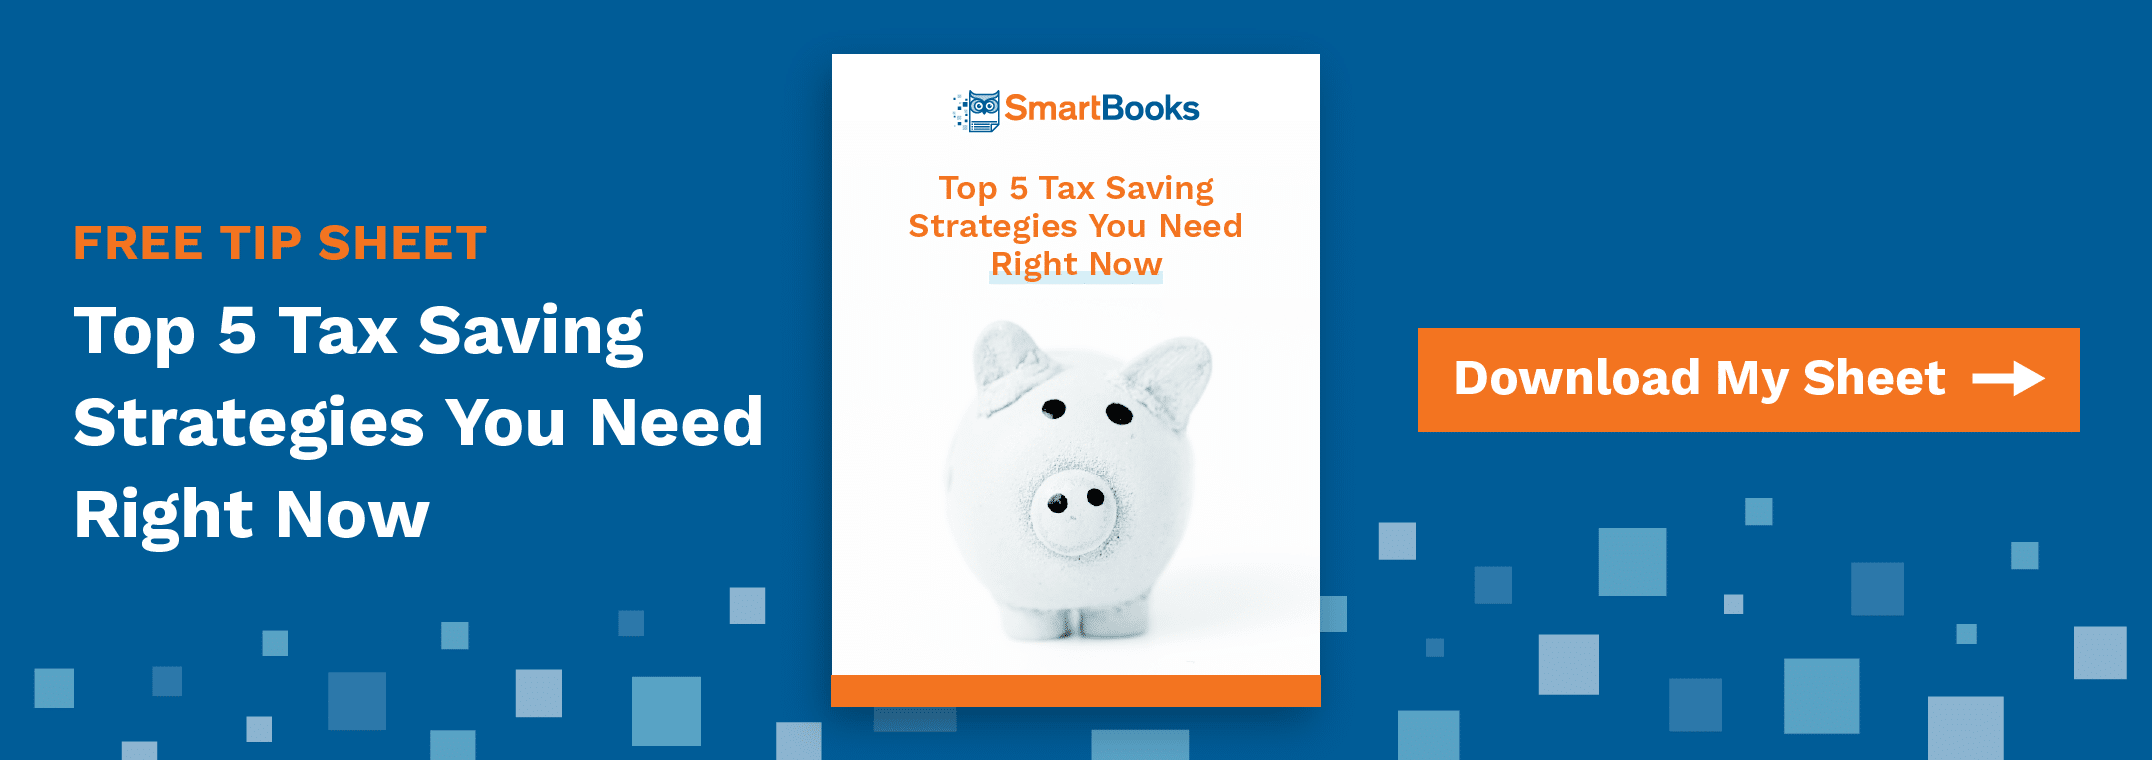 Top 5 Tax Saving Strategies You Need Right Now